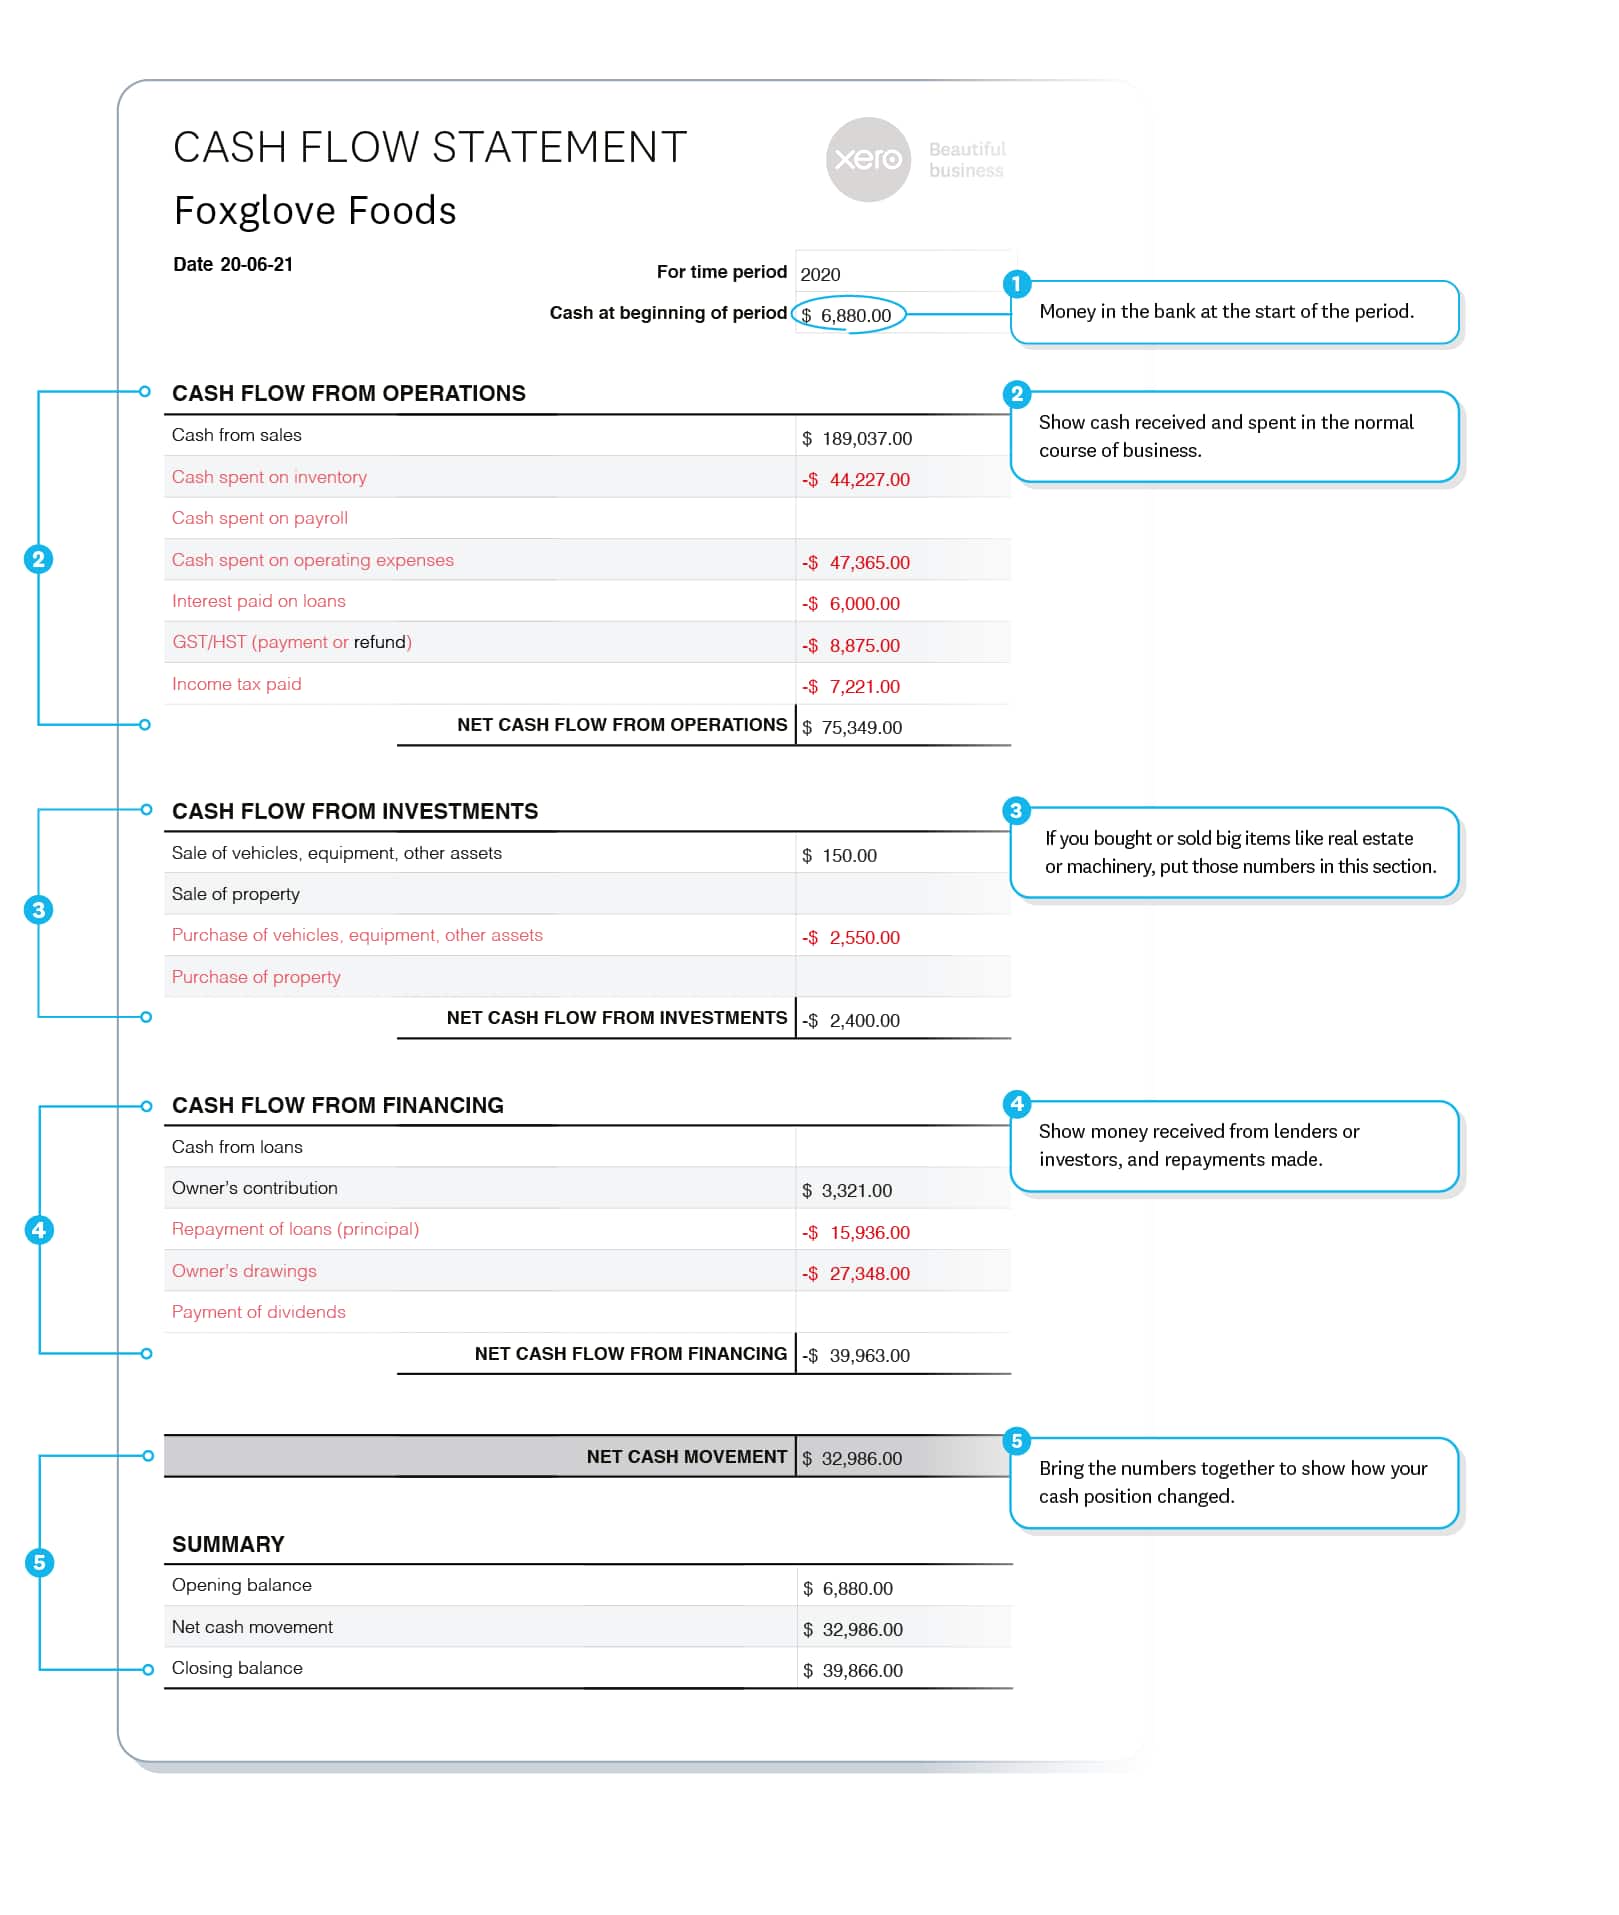 Cash flow statement example shows money in and out from operations, investments and financing.